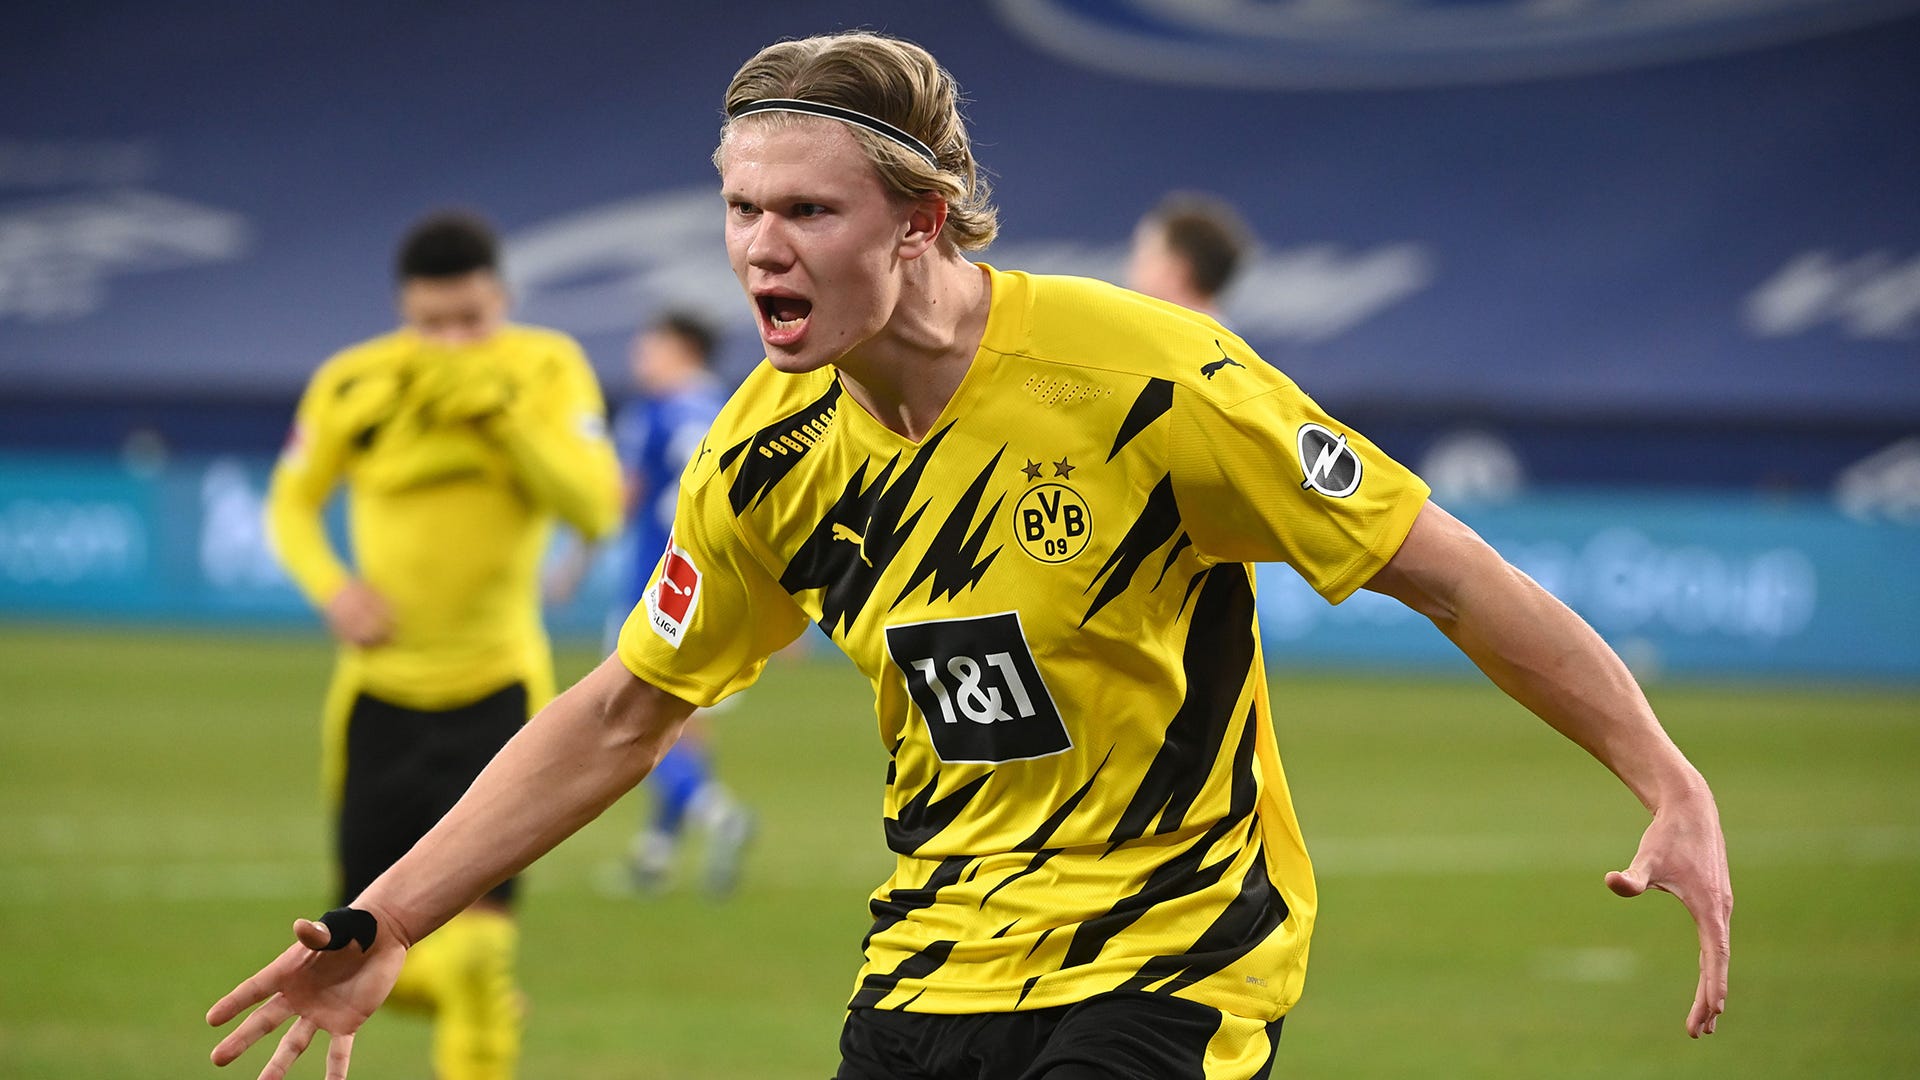 100m Is Unimaginable Kahn Rules Bayern Out Of Race To Sign Haaland In Summer Due To High Fee Goal Com Us